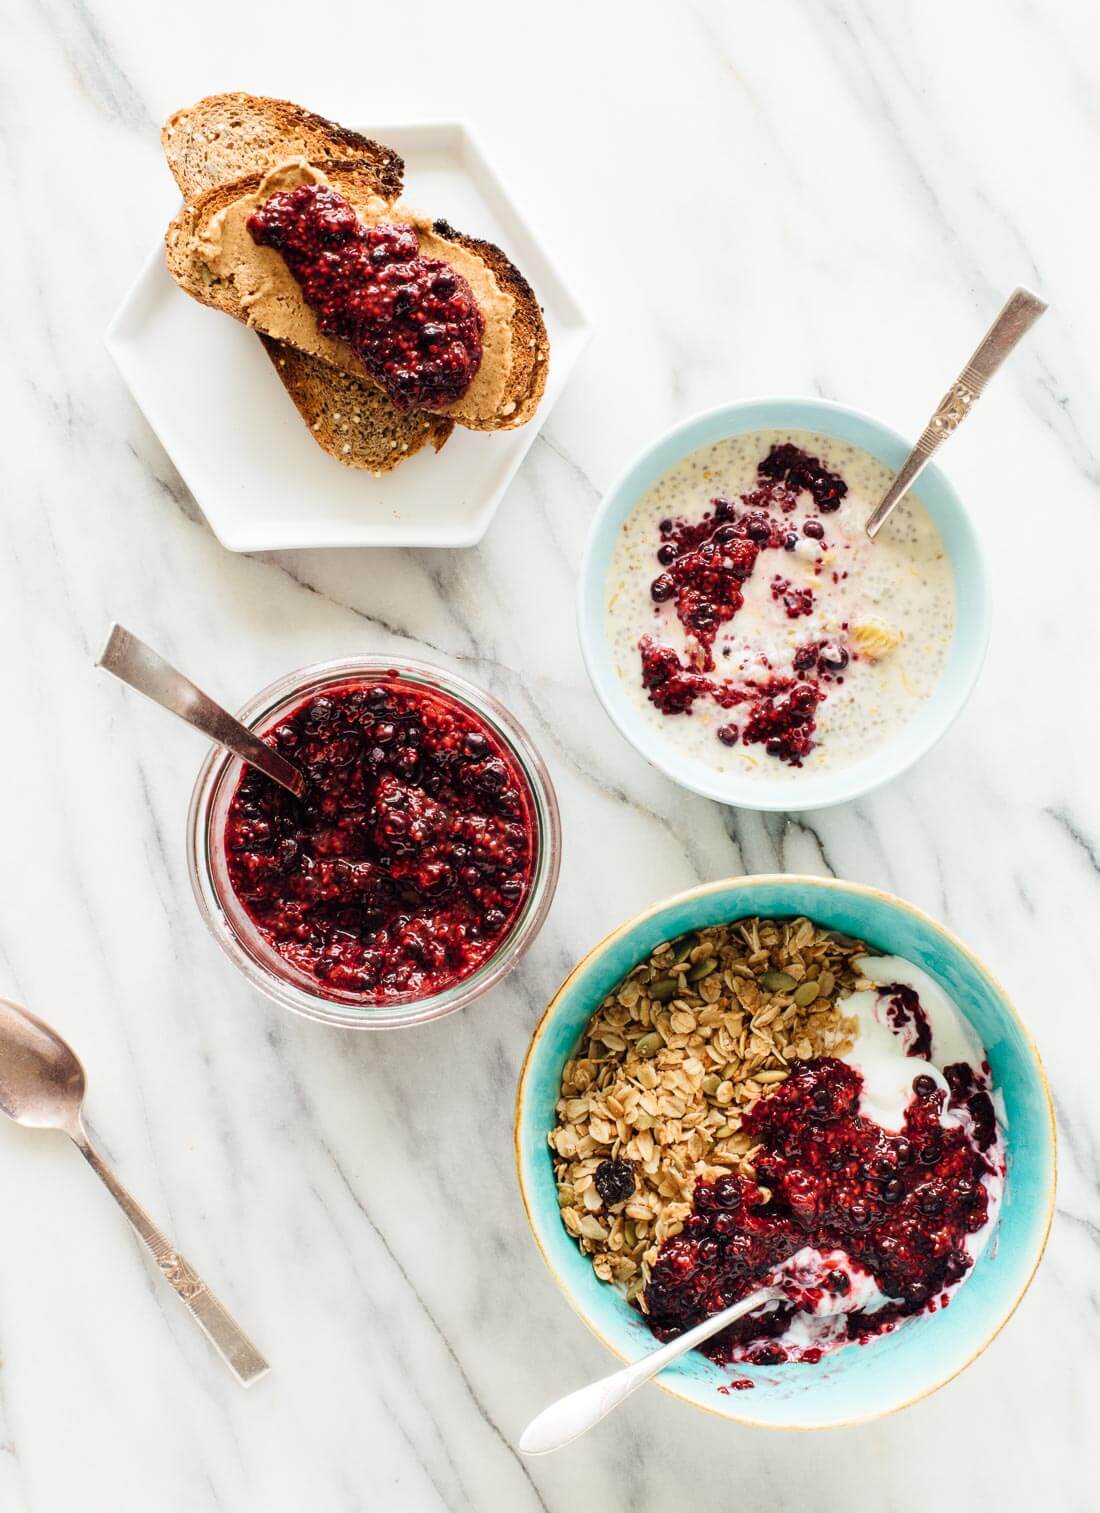 This simple chia seed jam recipe is made with defrosted blueberries and raspberries (no cooking required)! Eat more nutritious berries with this easy jam.